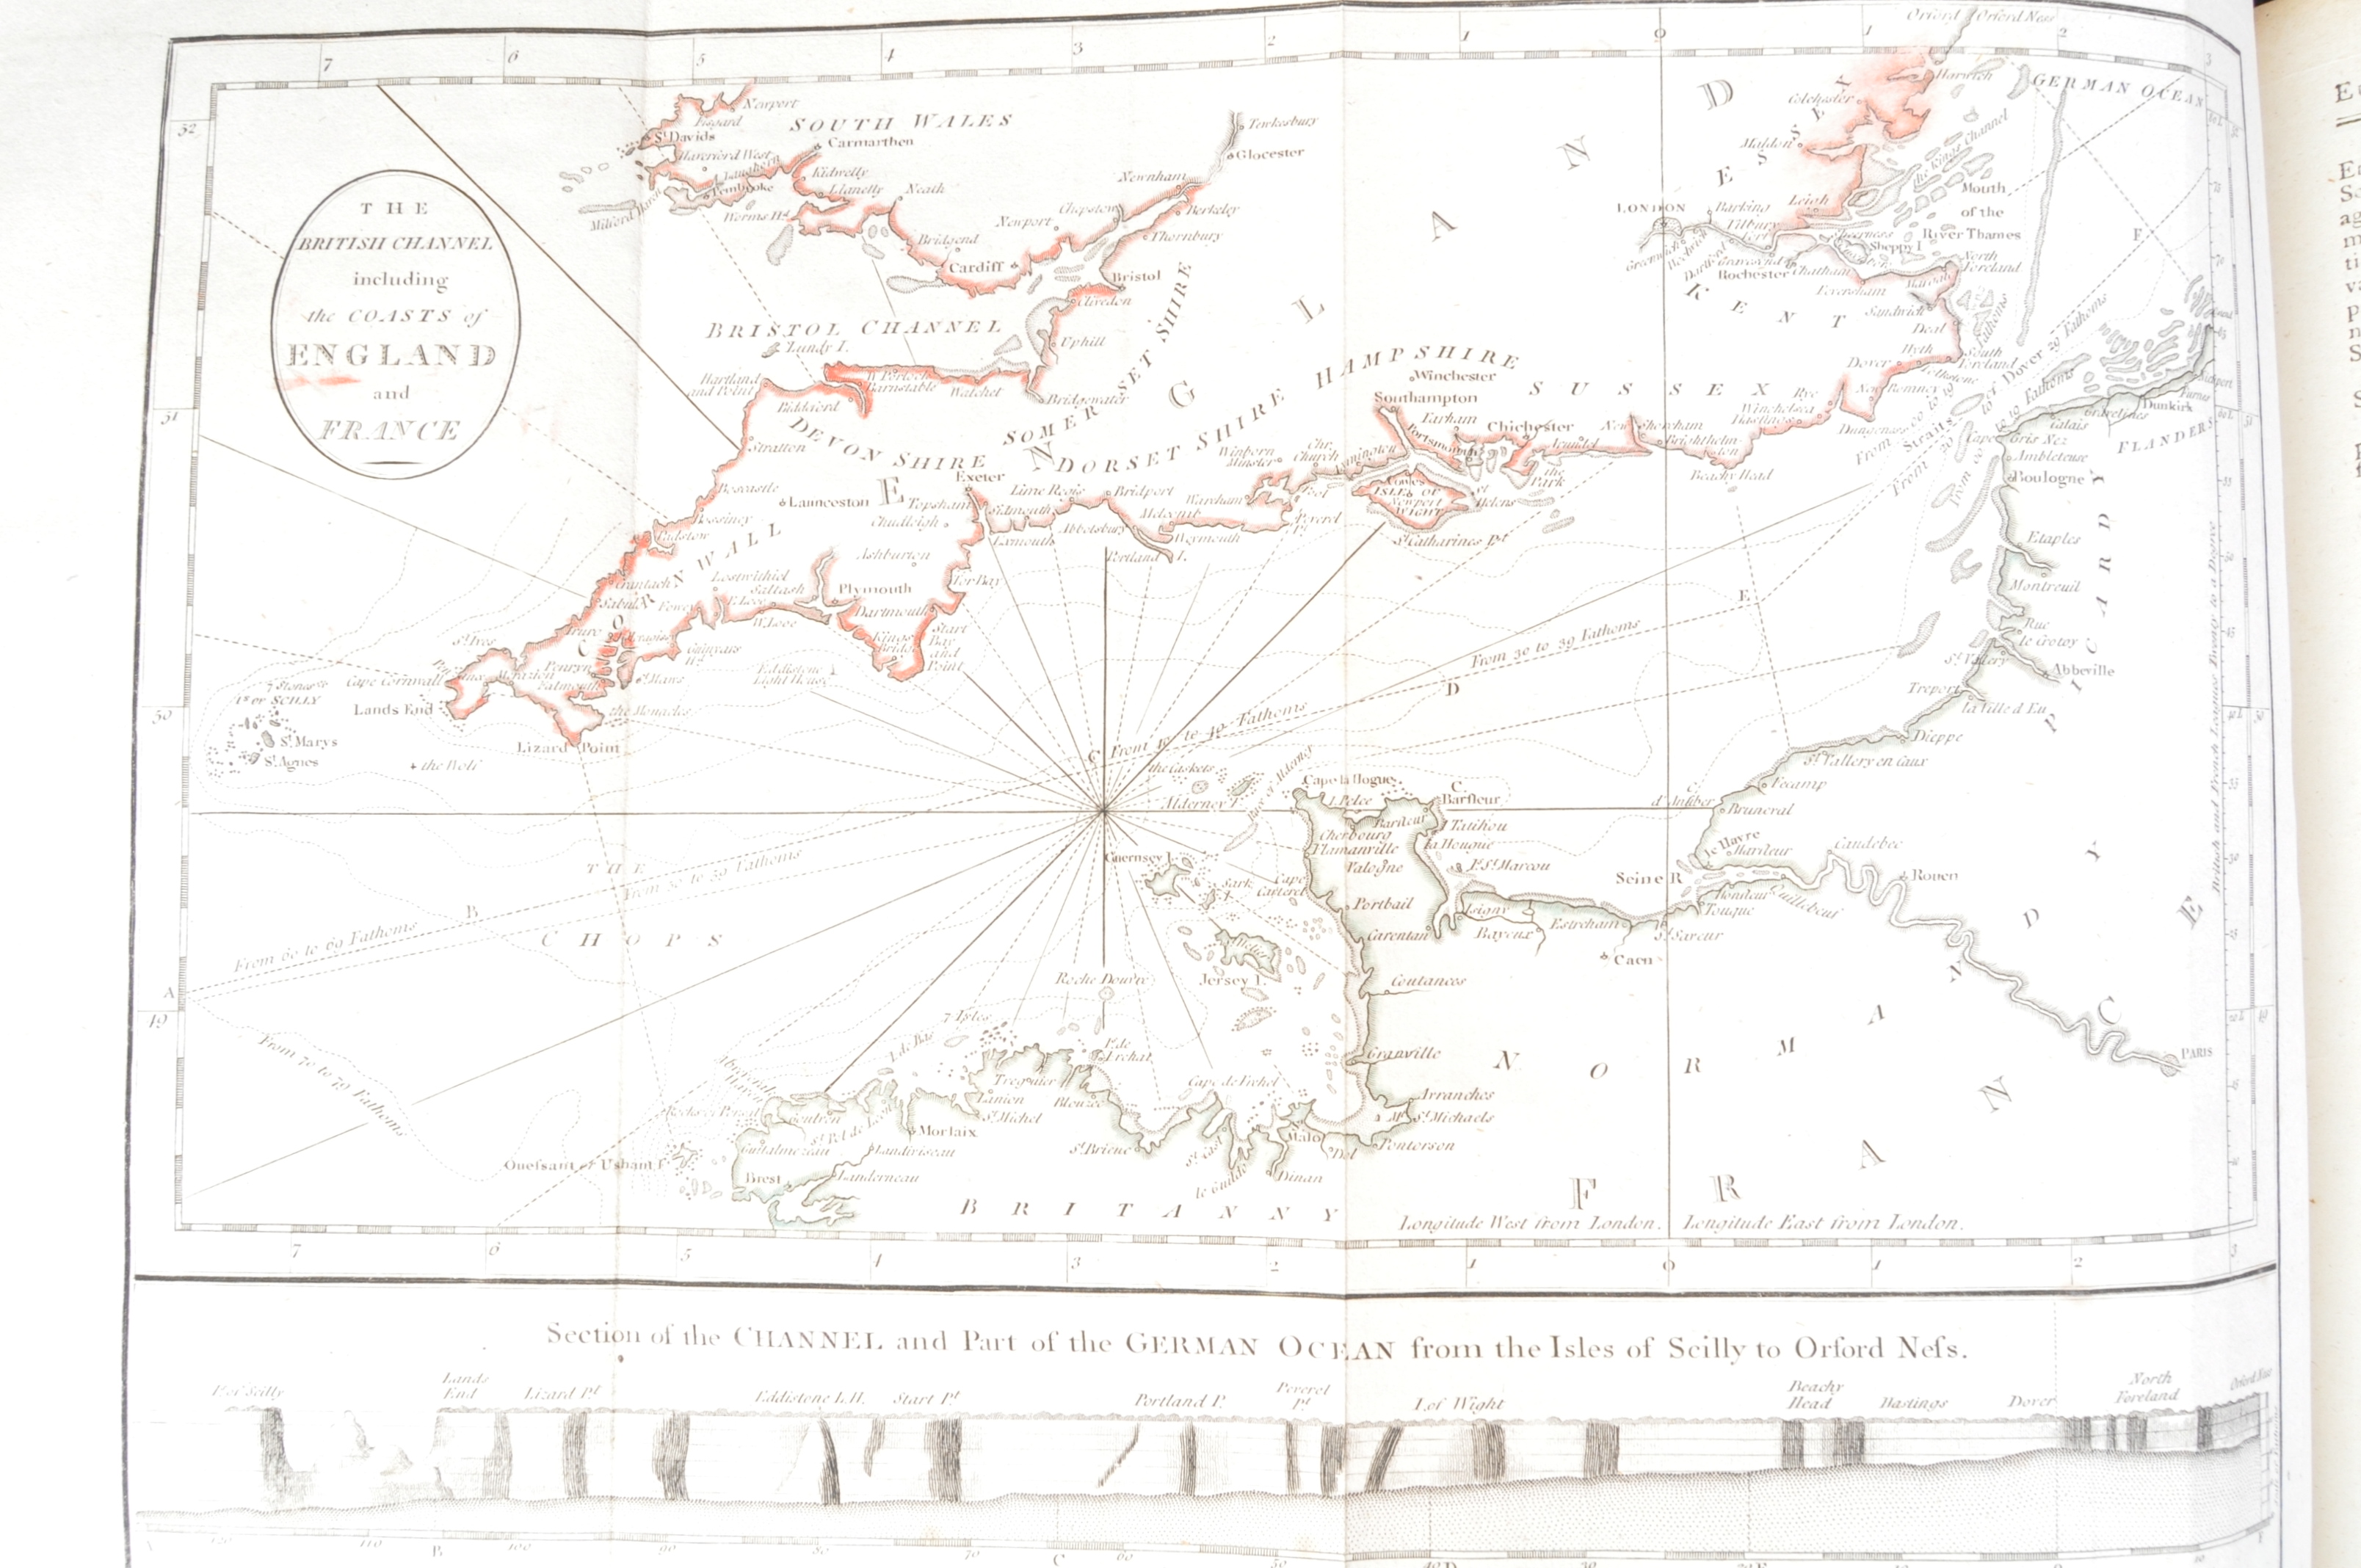 ADAMS, MICHAEL - 1793 - 'THE NEW ROYAL GEOGRAPHICAL MAGAZINE' - Image 14 of 14